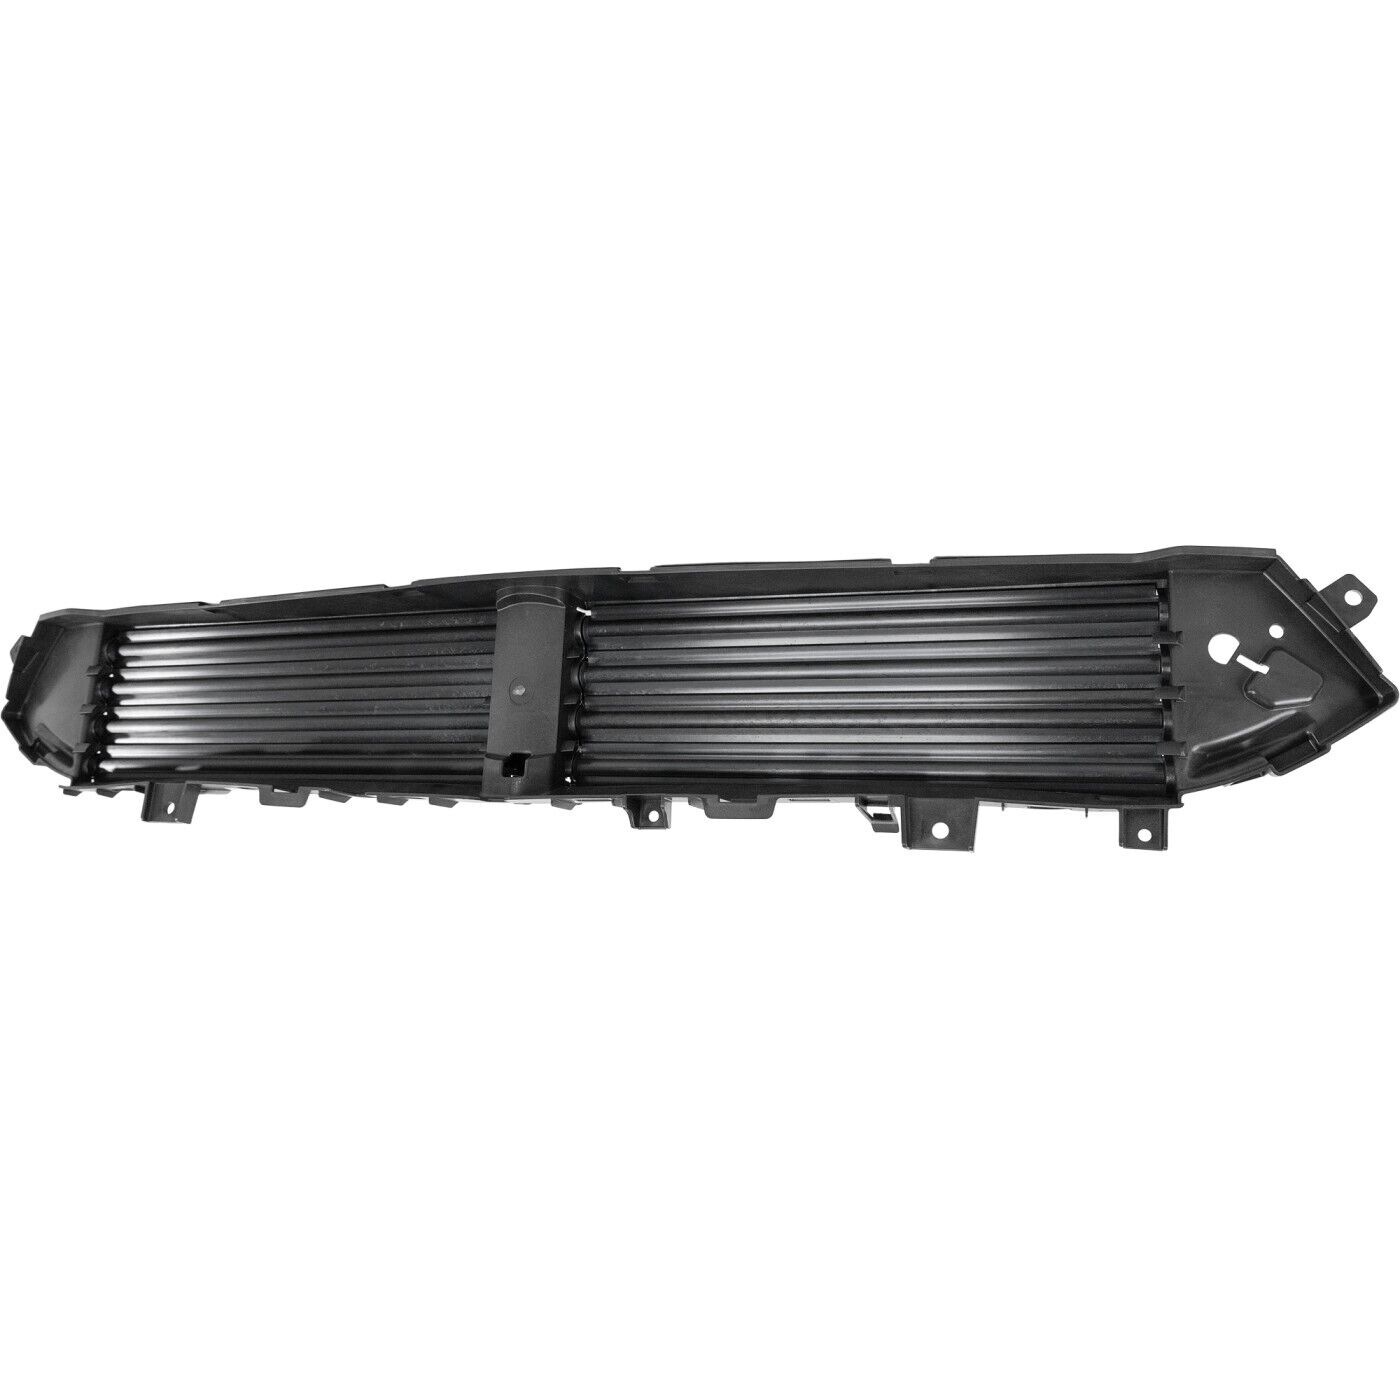 Active Grille Shutter For 2020-2022 Chrysler Voyager Lower CH1206109